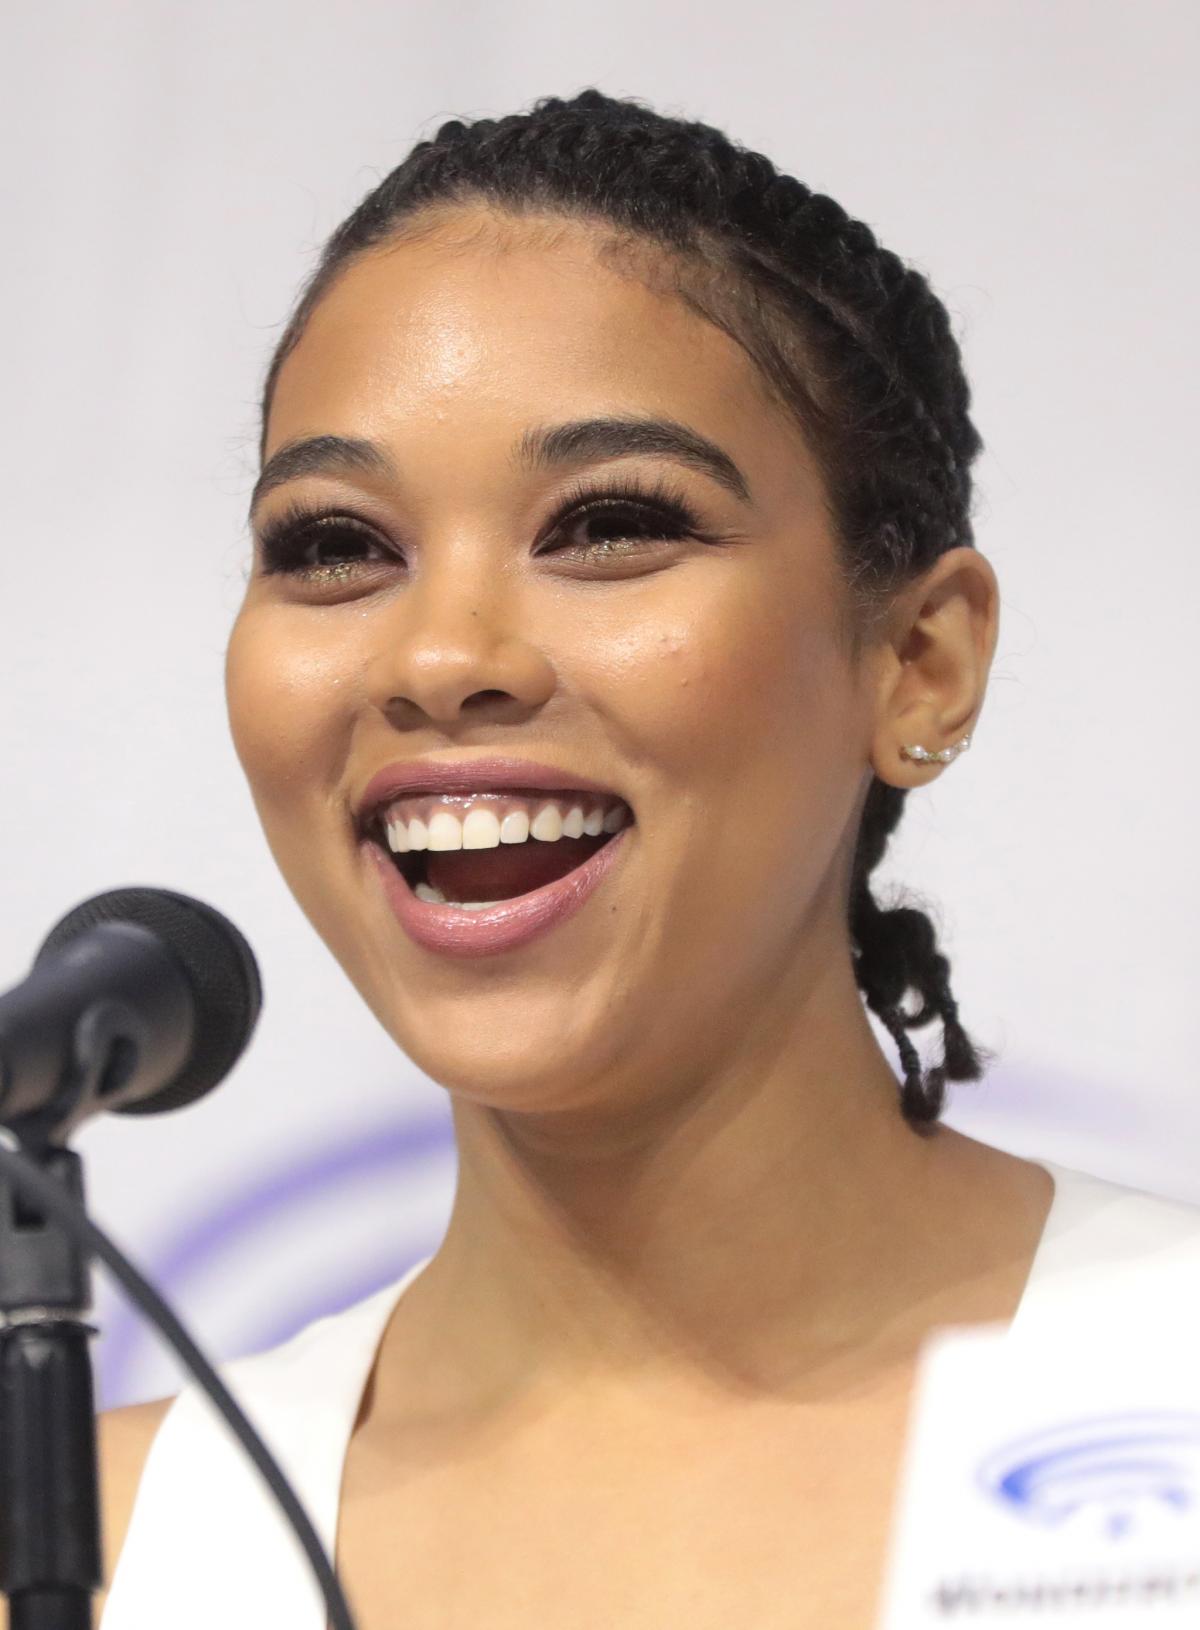 Alexandra Shipp - Celebrity biography, zodiac sign and famous quotes